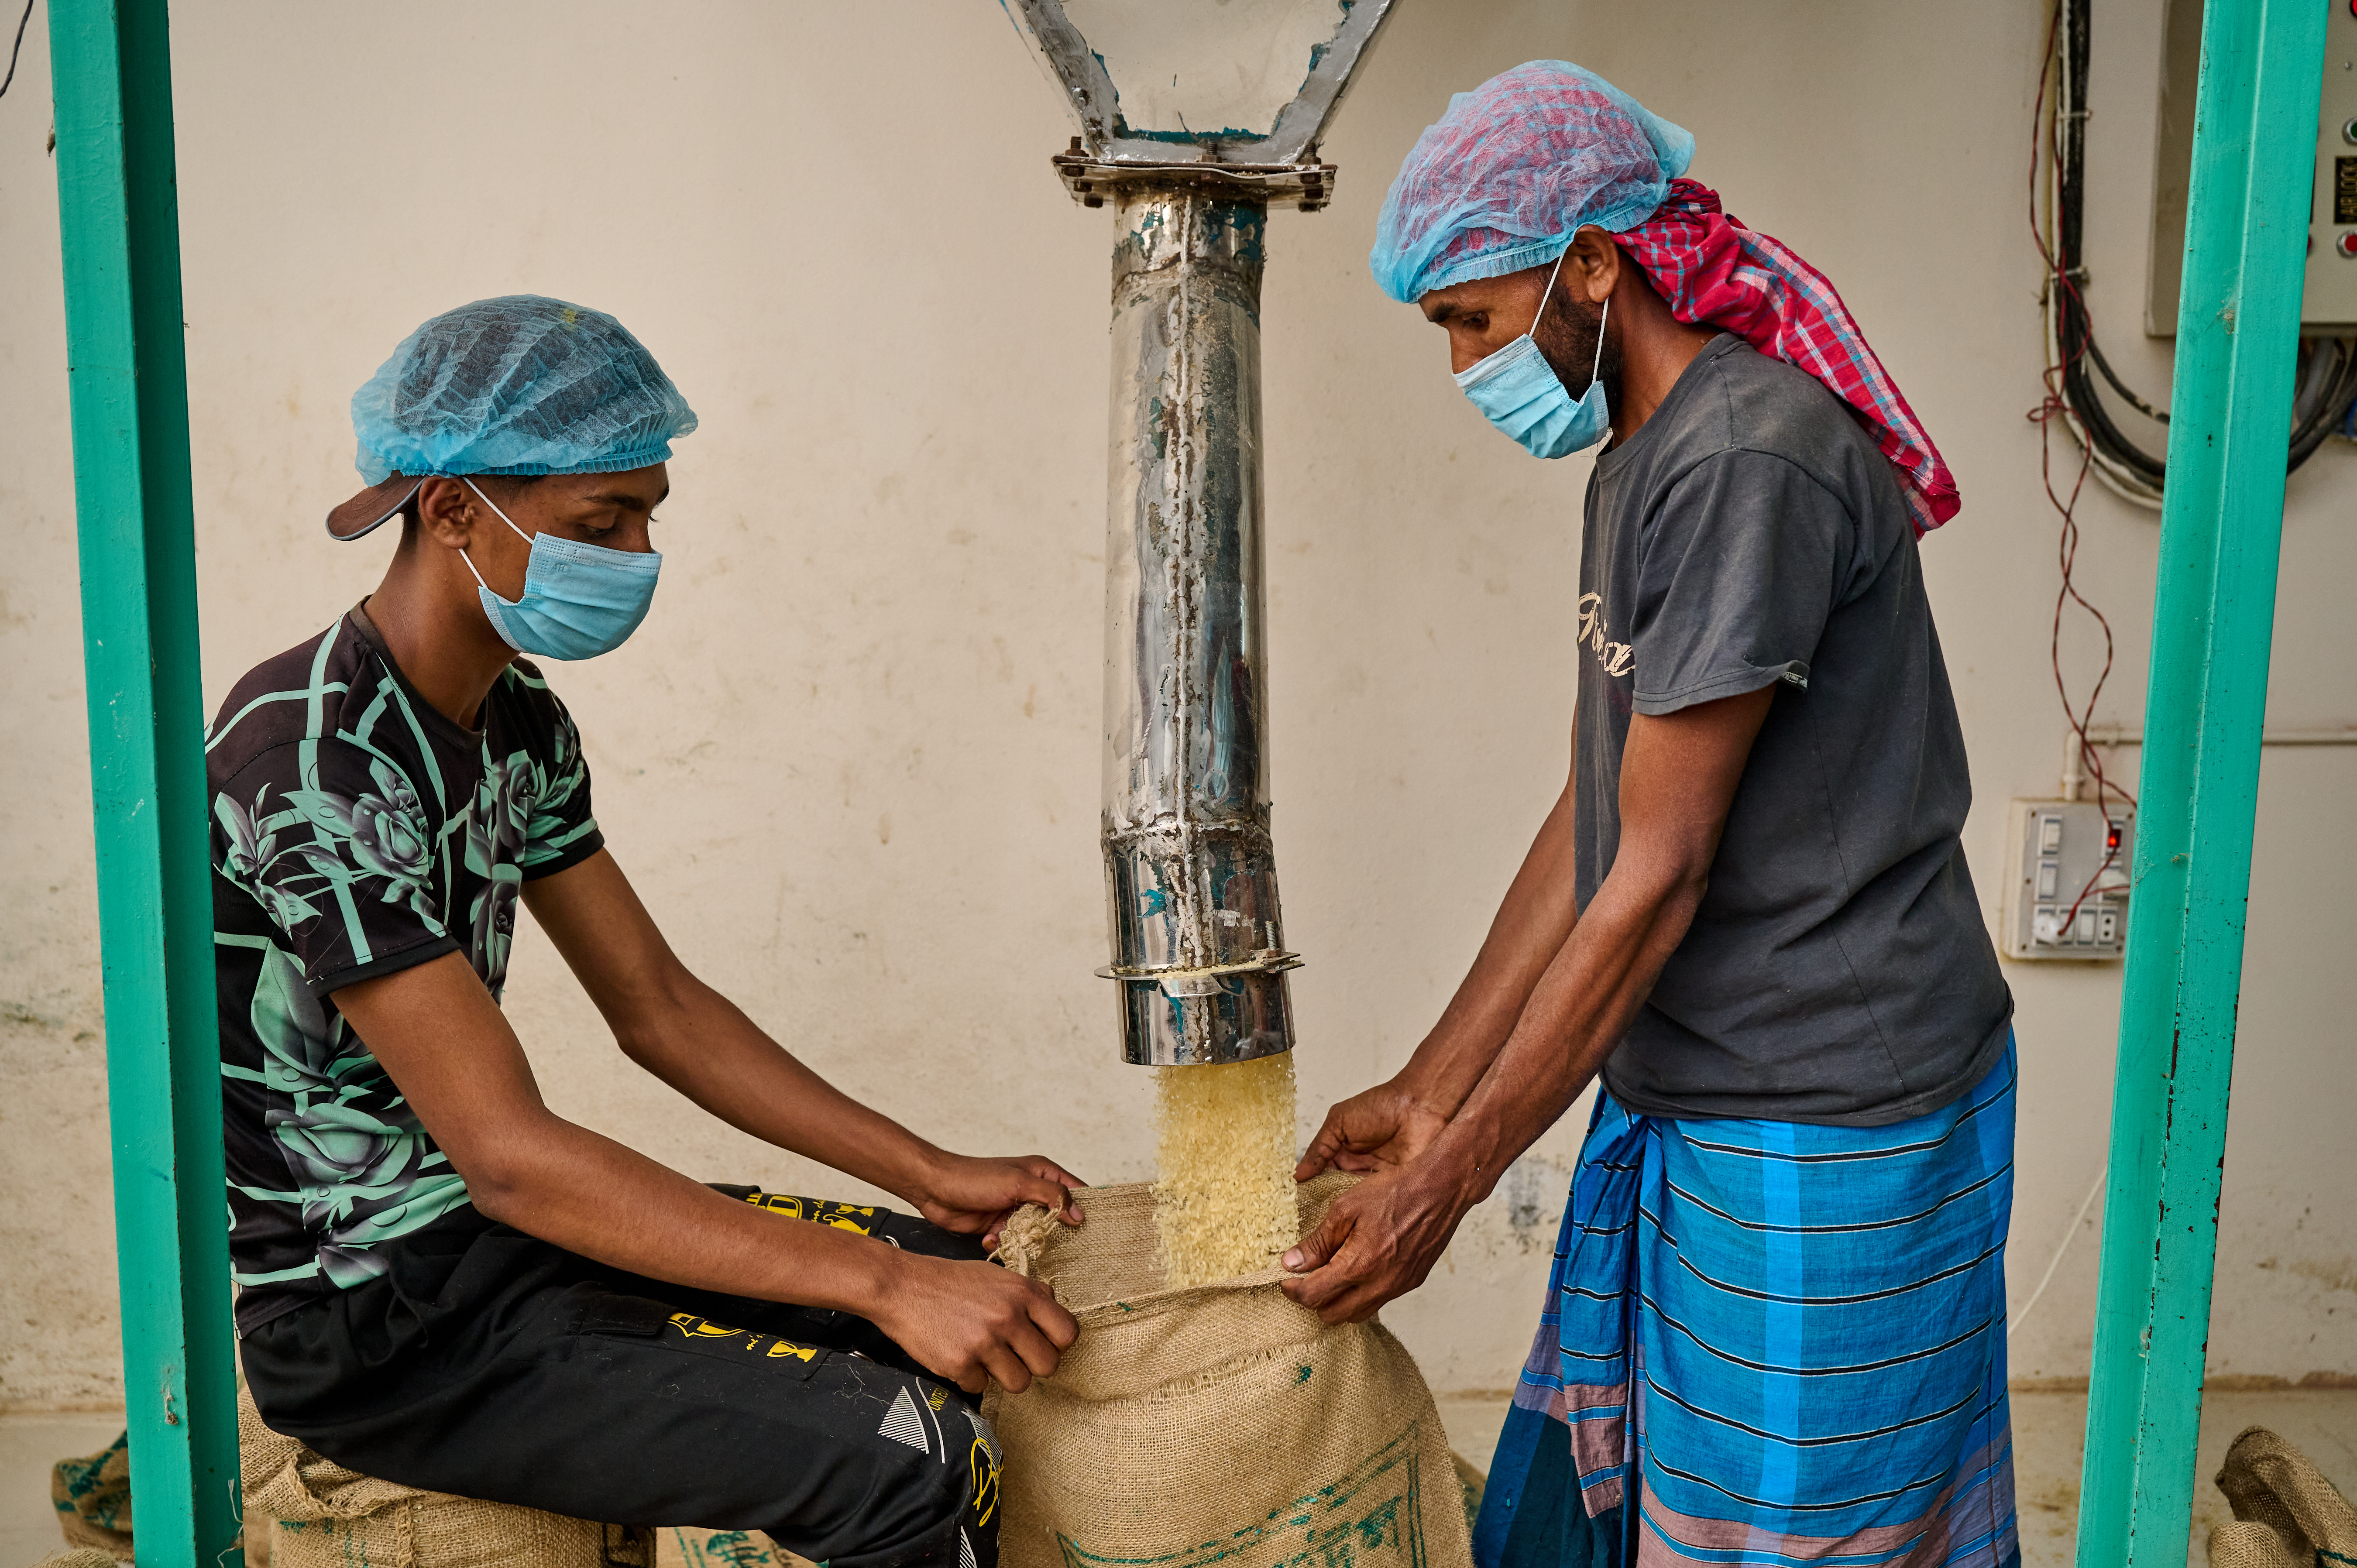 Two workers hold a sack that blended fortitied rice kernals and nonfortified kernals are combined into in Bangladesh.